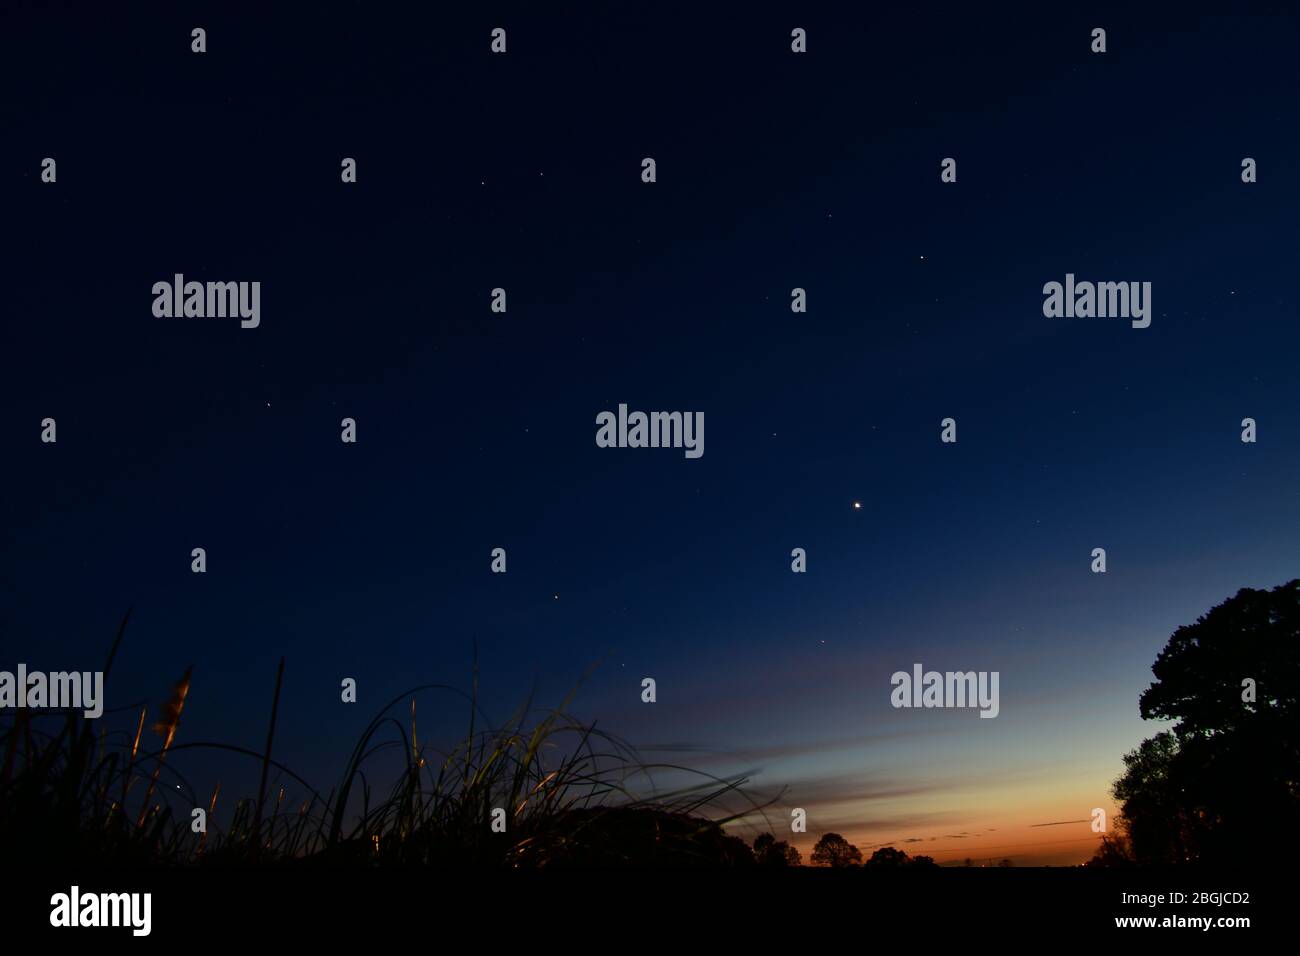 Cleeve, North Somerset. 21st Apr 2020. UK weather.late evening sunset over fields in North Somerset with dramatic show of stars above.Picture Credit Robert Timoney/Alamy/Live/News Stock Photo